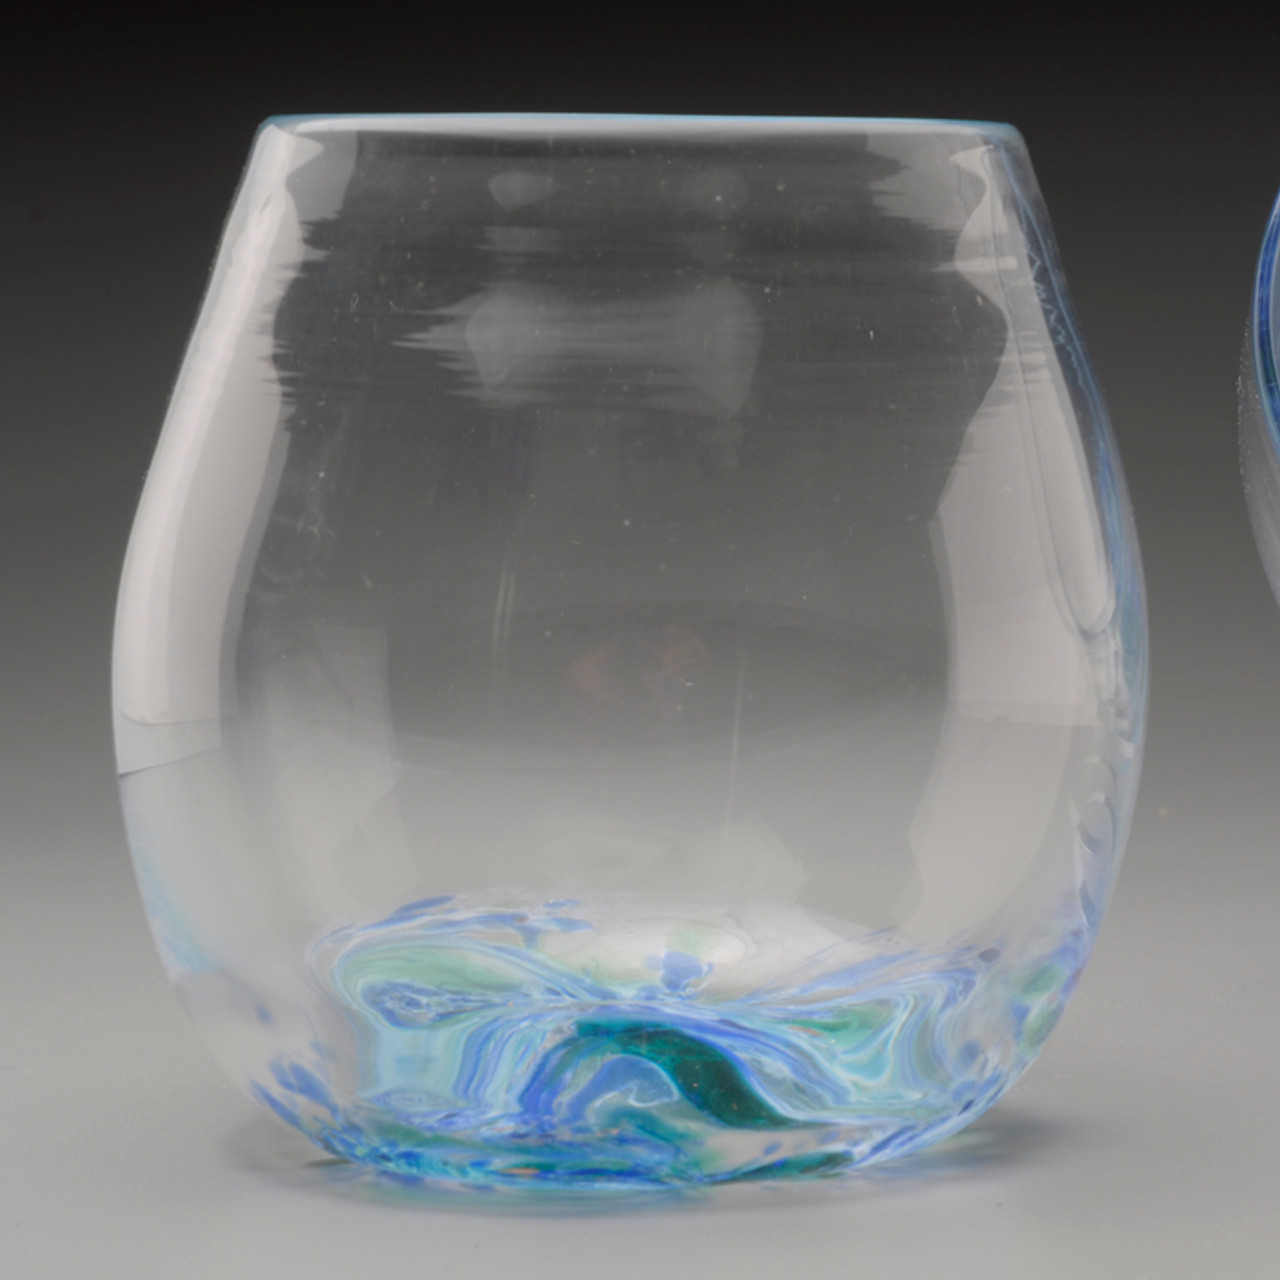 Handblown Crackle Thumbler, Stemless Wine Glasses style, glassblowing in  Vermont by Artisan Chris Sherwin